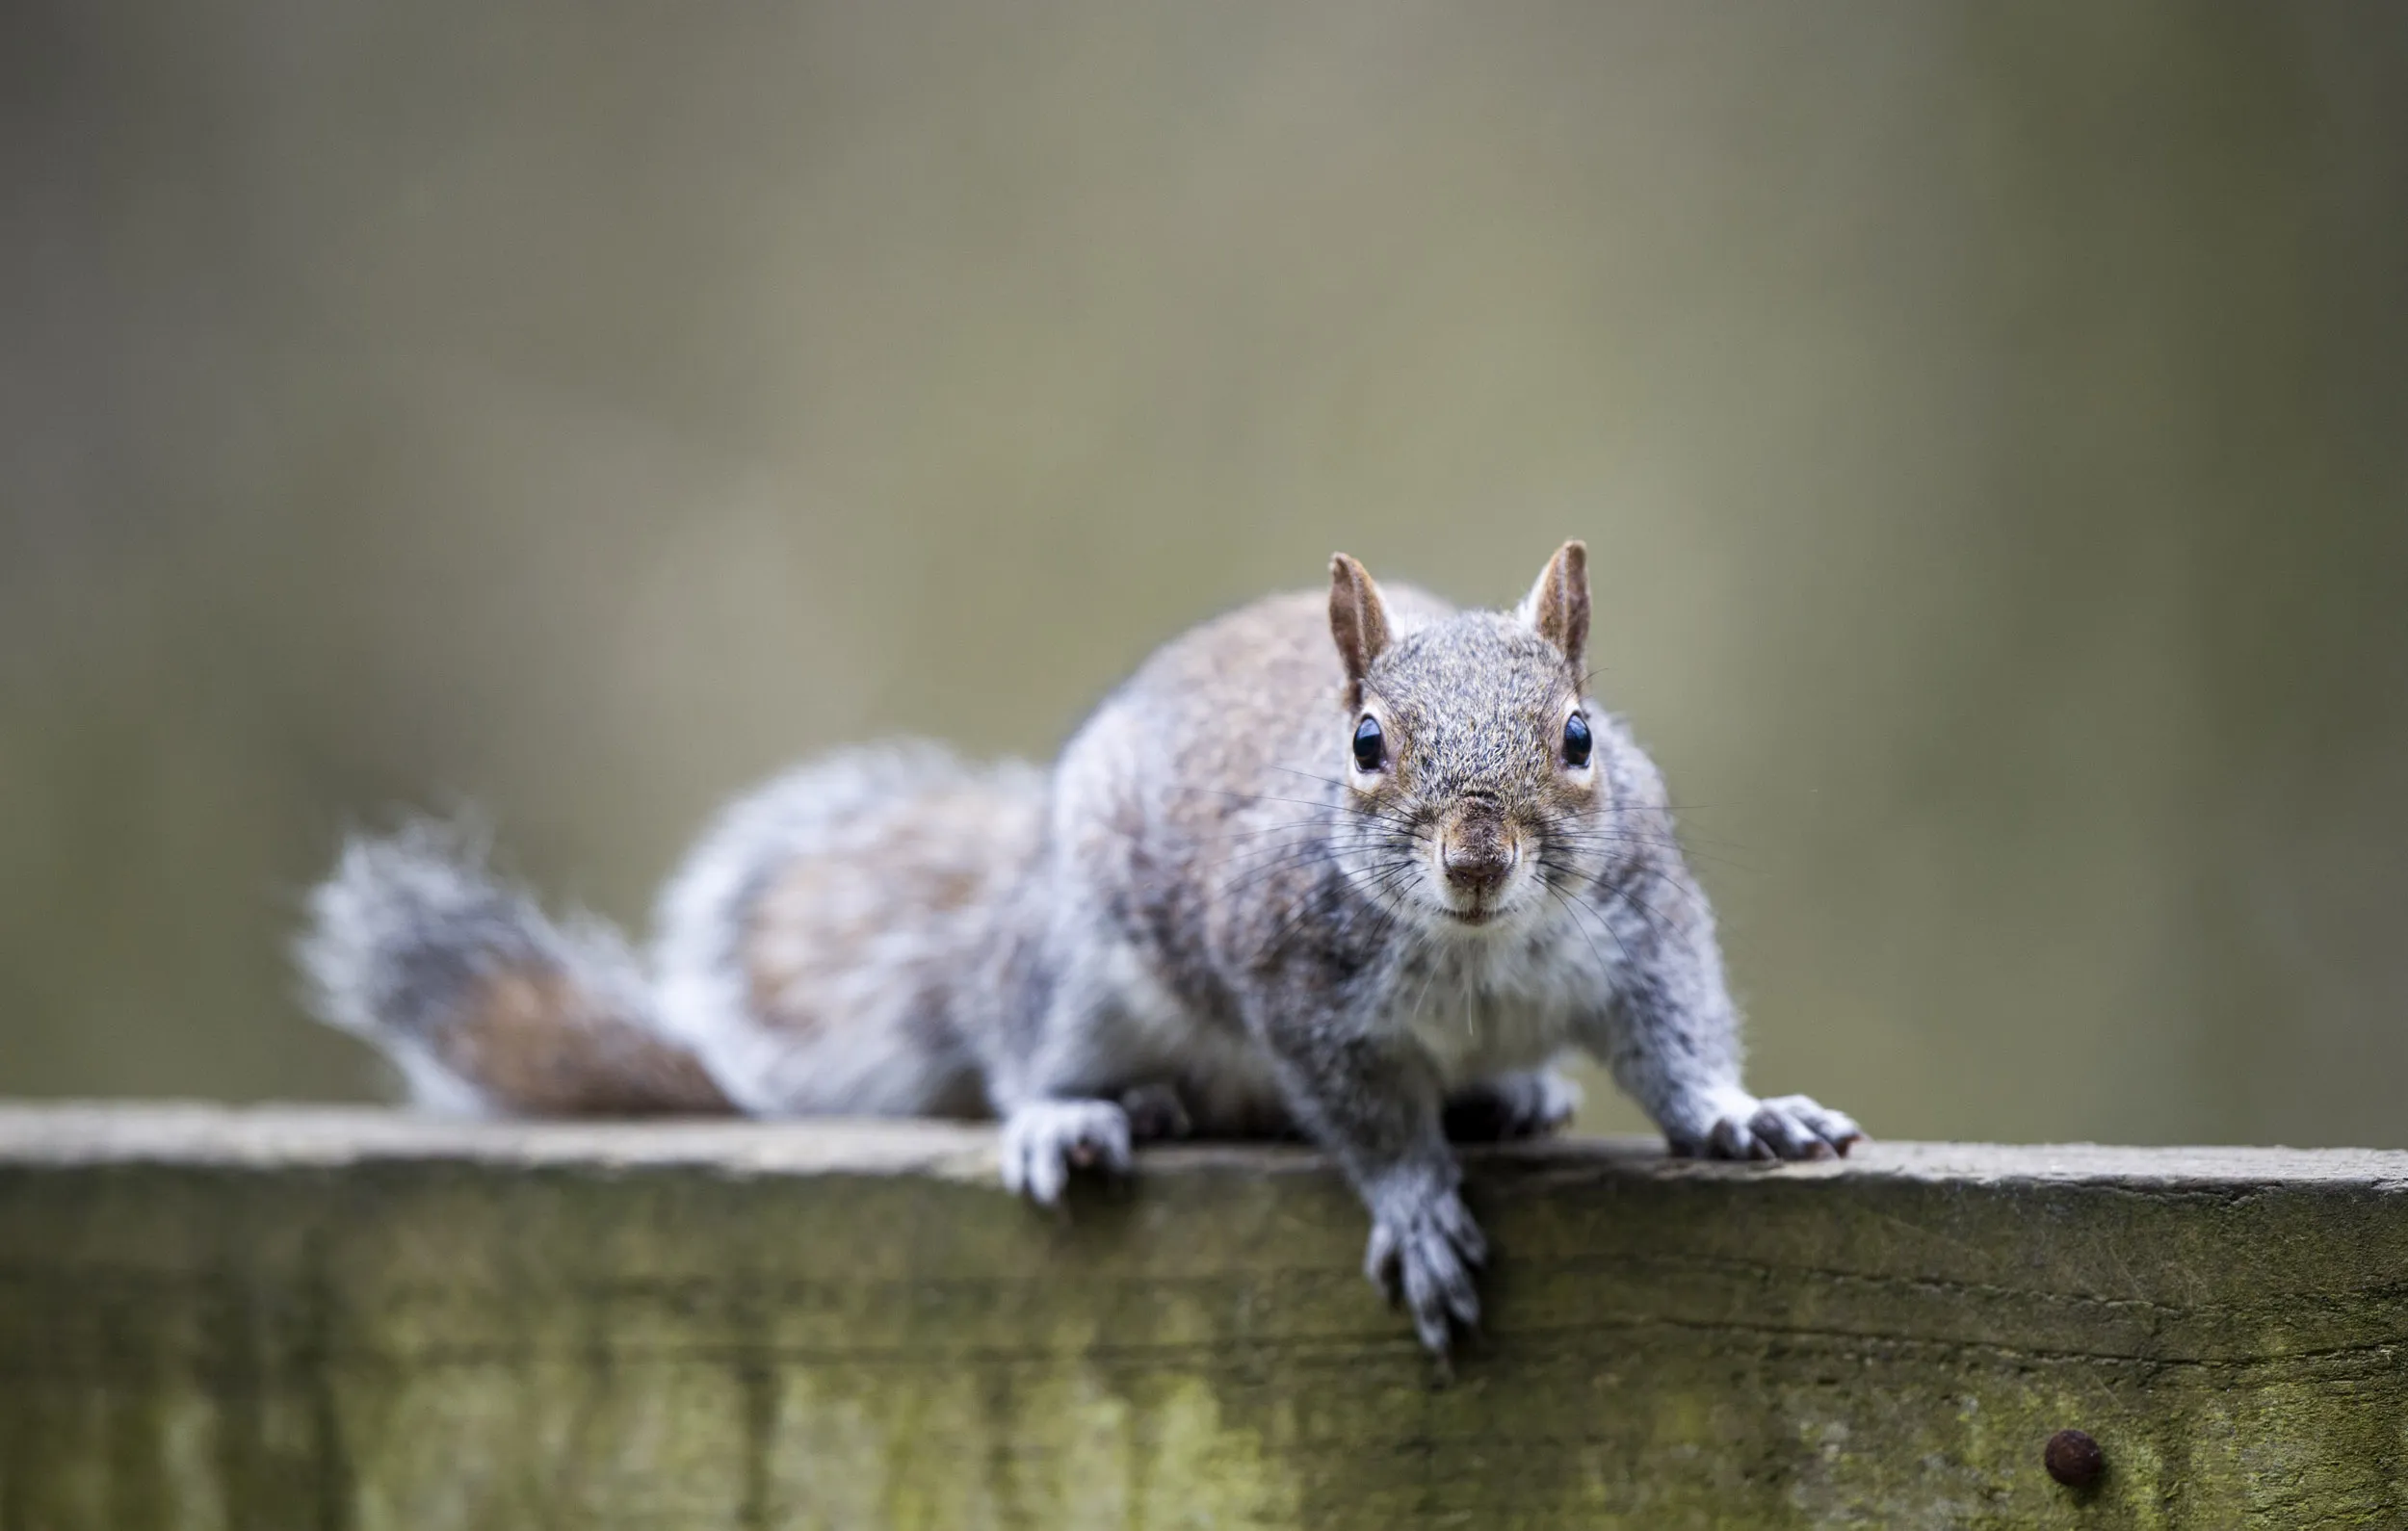 A lone Grey Squirrel scurrying along a wooden fence.